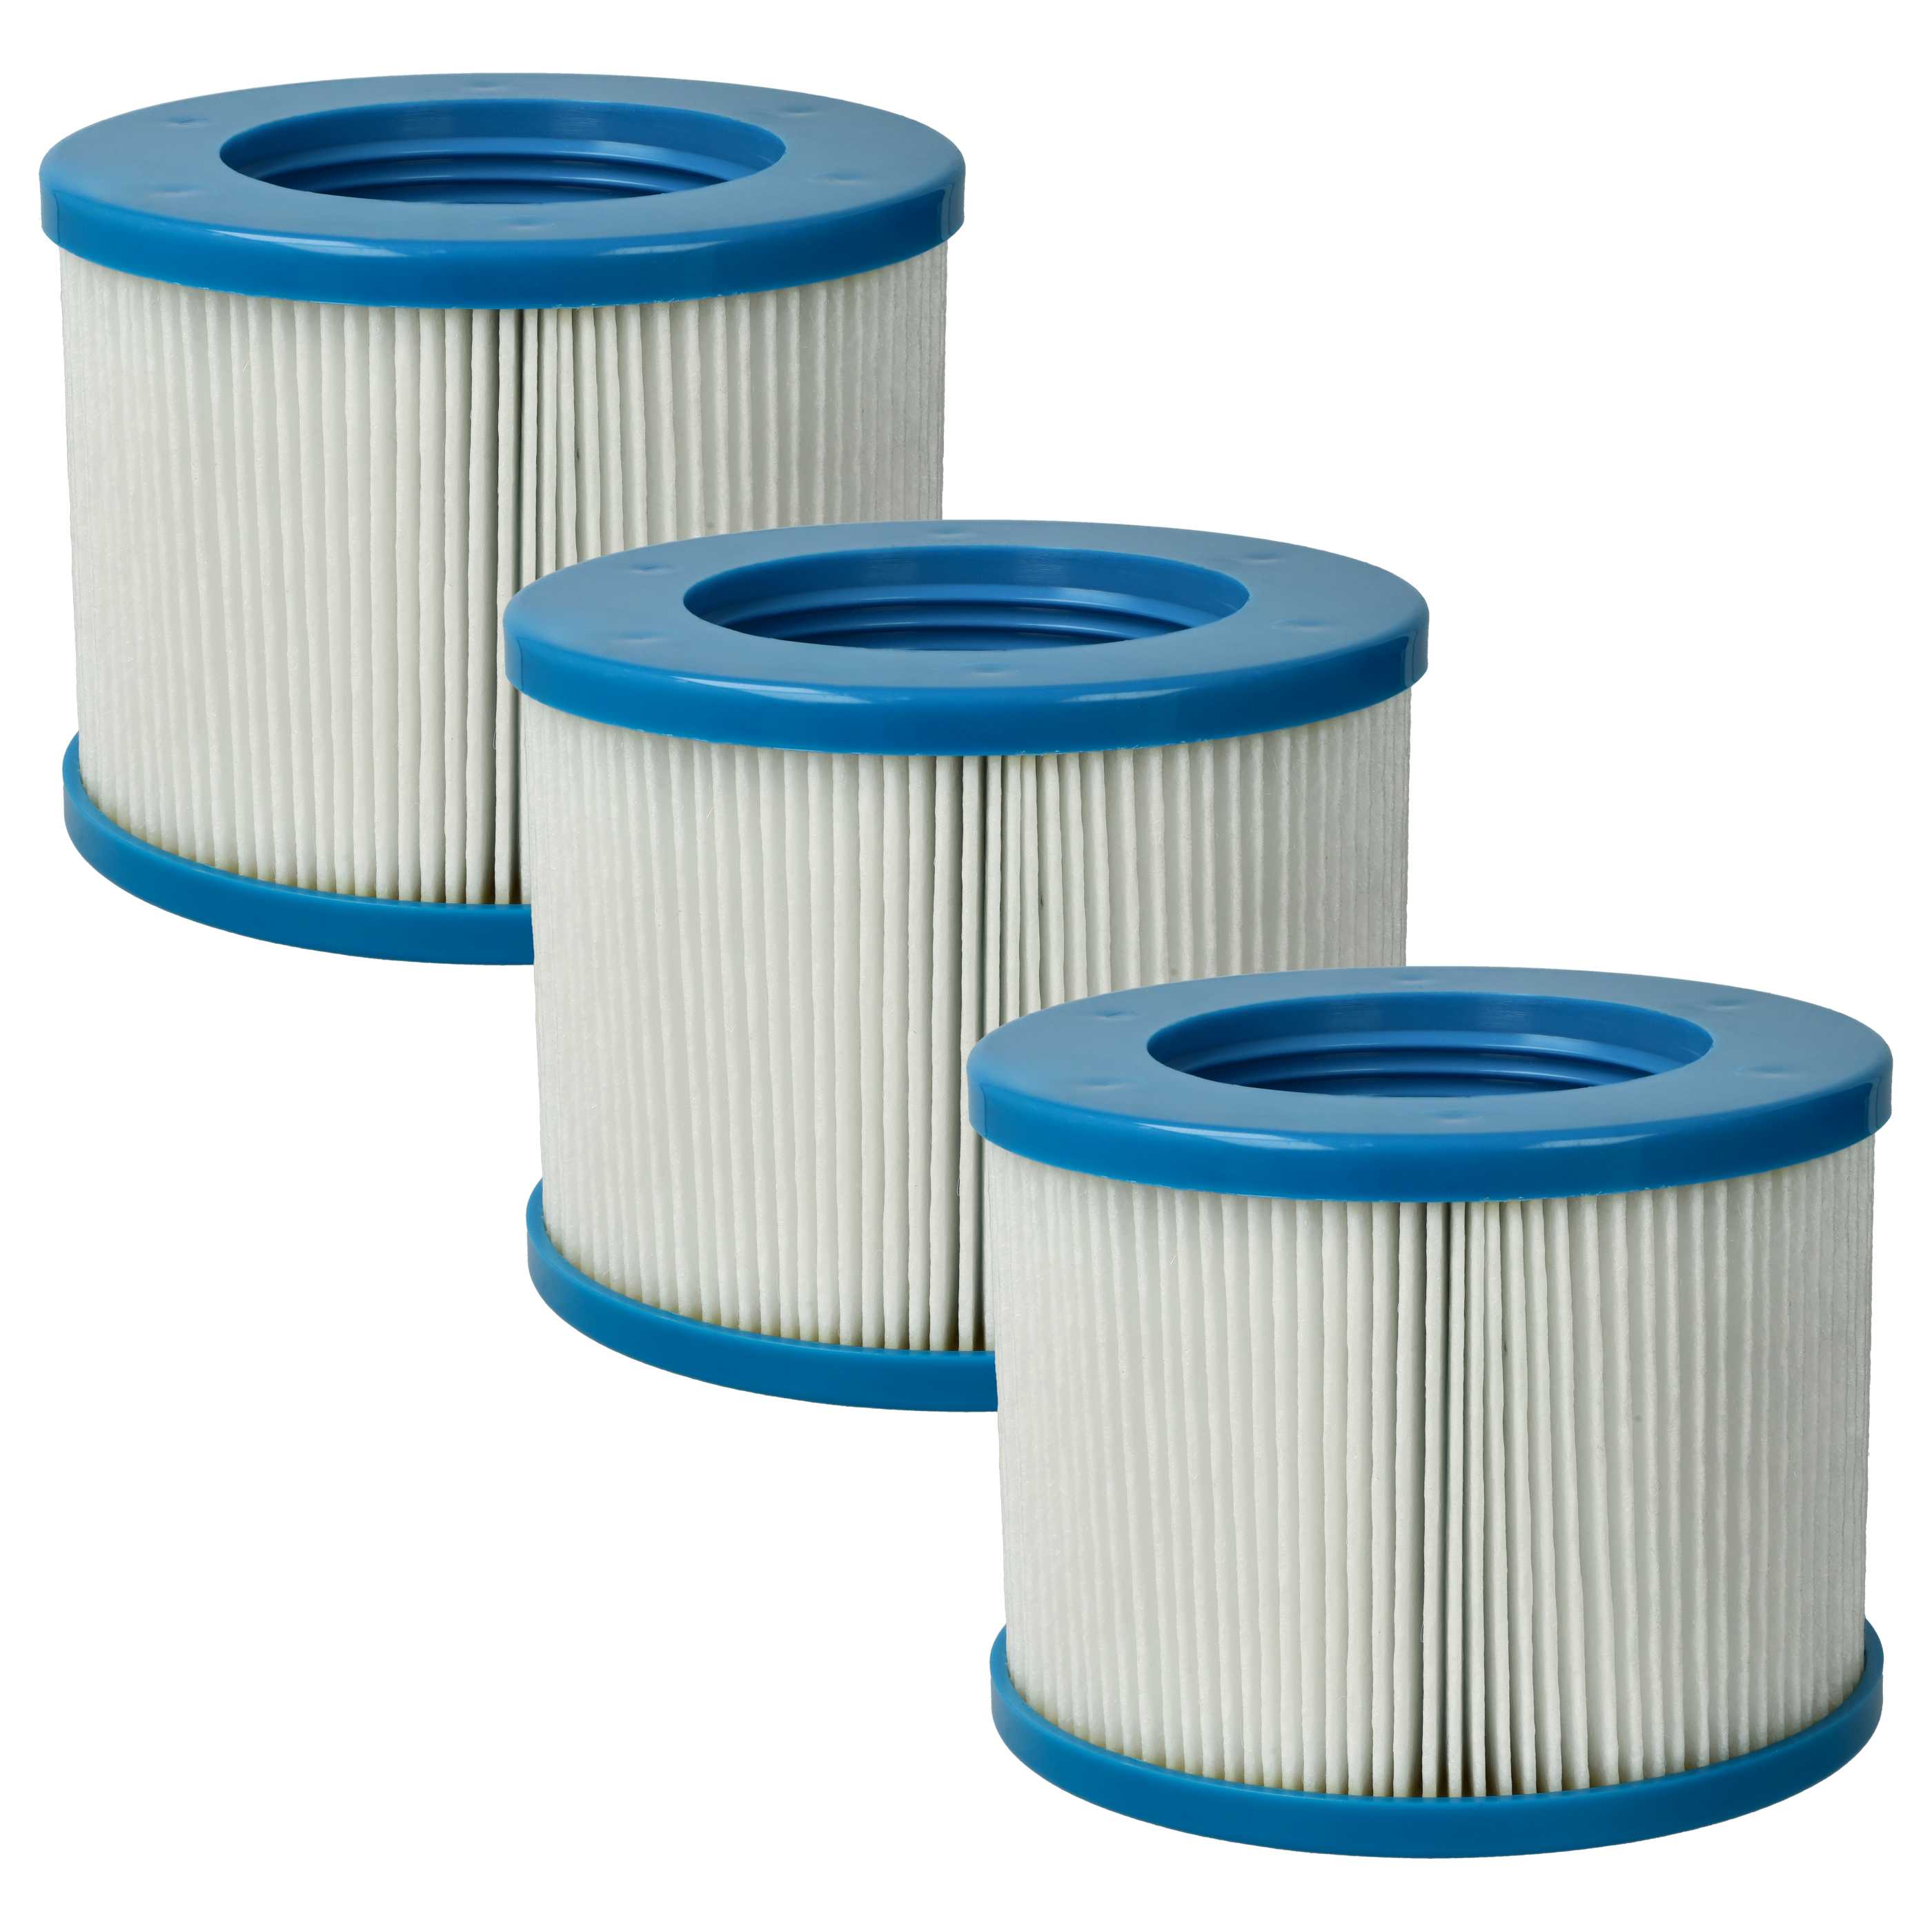 3x Pool Filter as Replacement for Arebos AR-6FK, 4260627422975 - Filter Cartridge